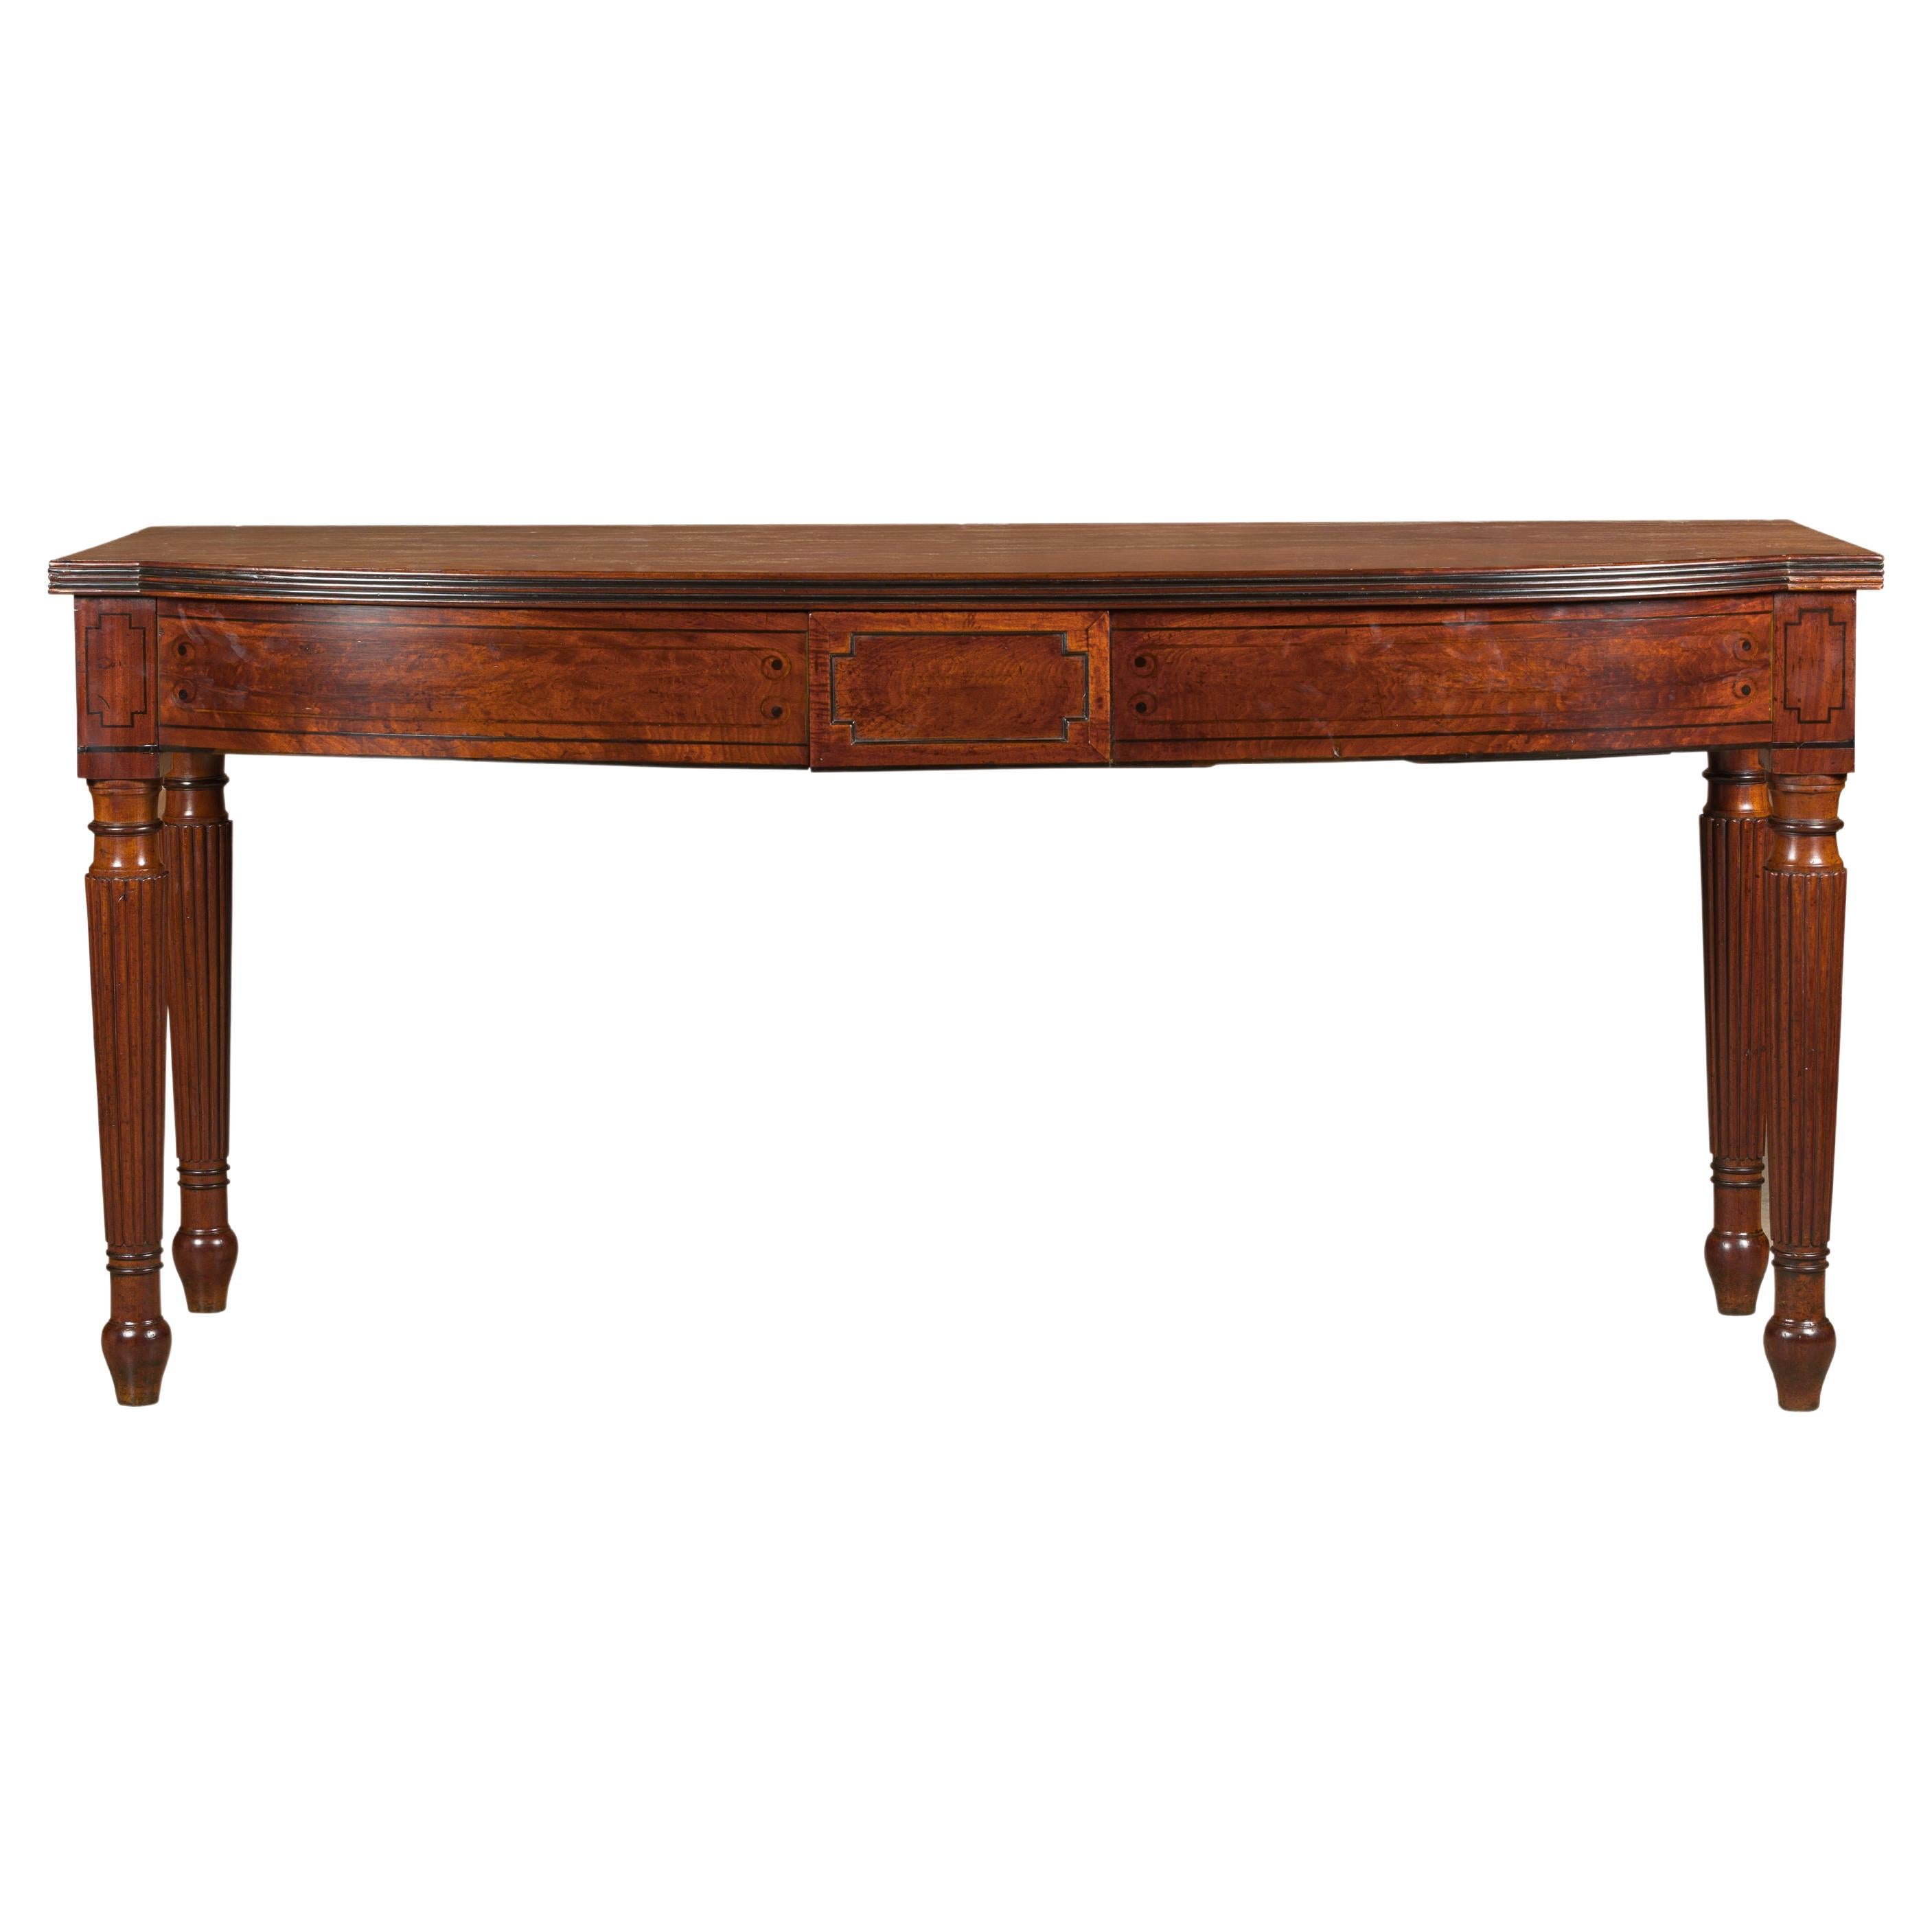 English Regency Early 19th Century Bow Front Console with Turned Reeded Legs